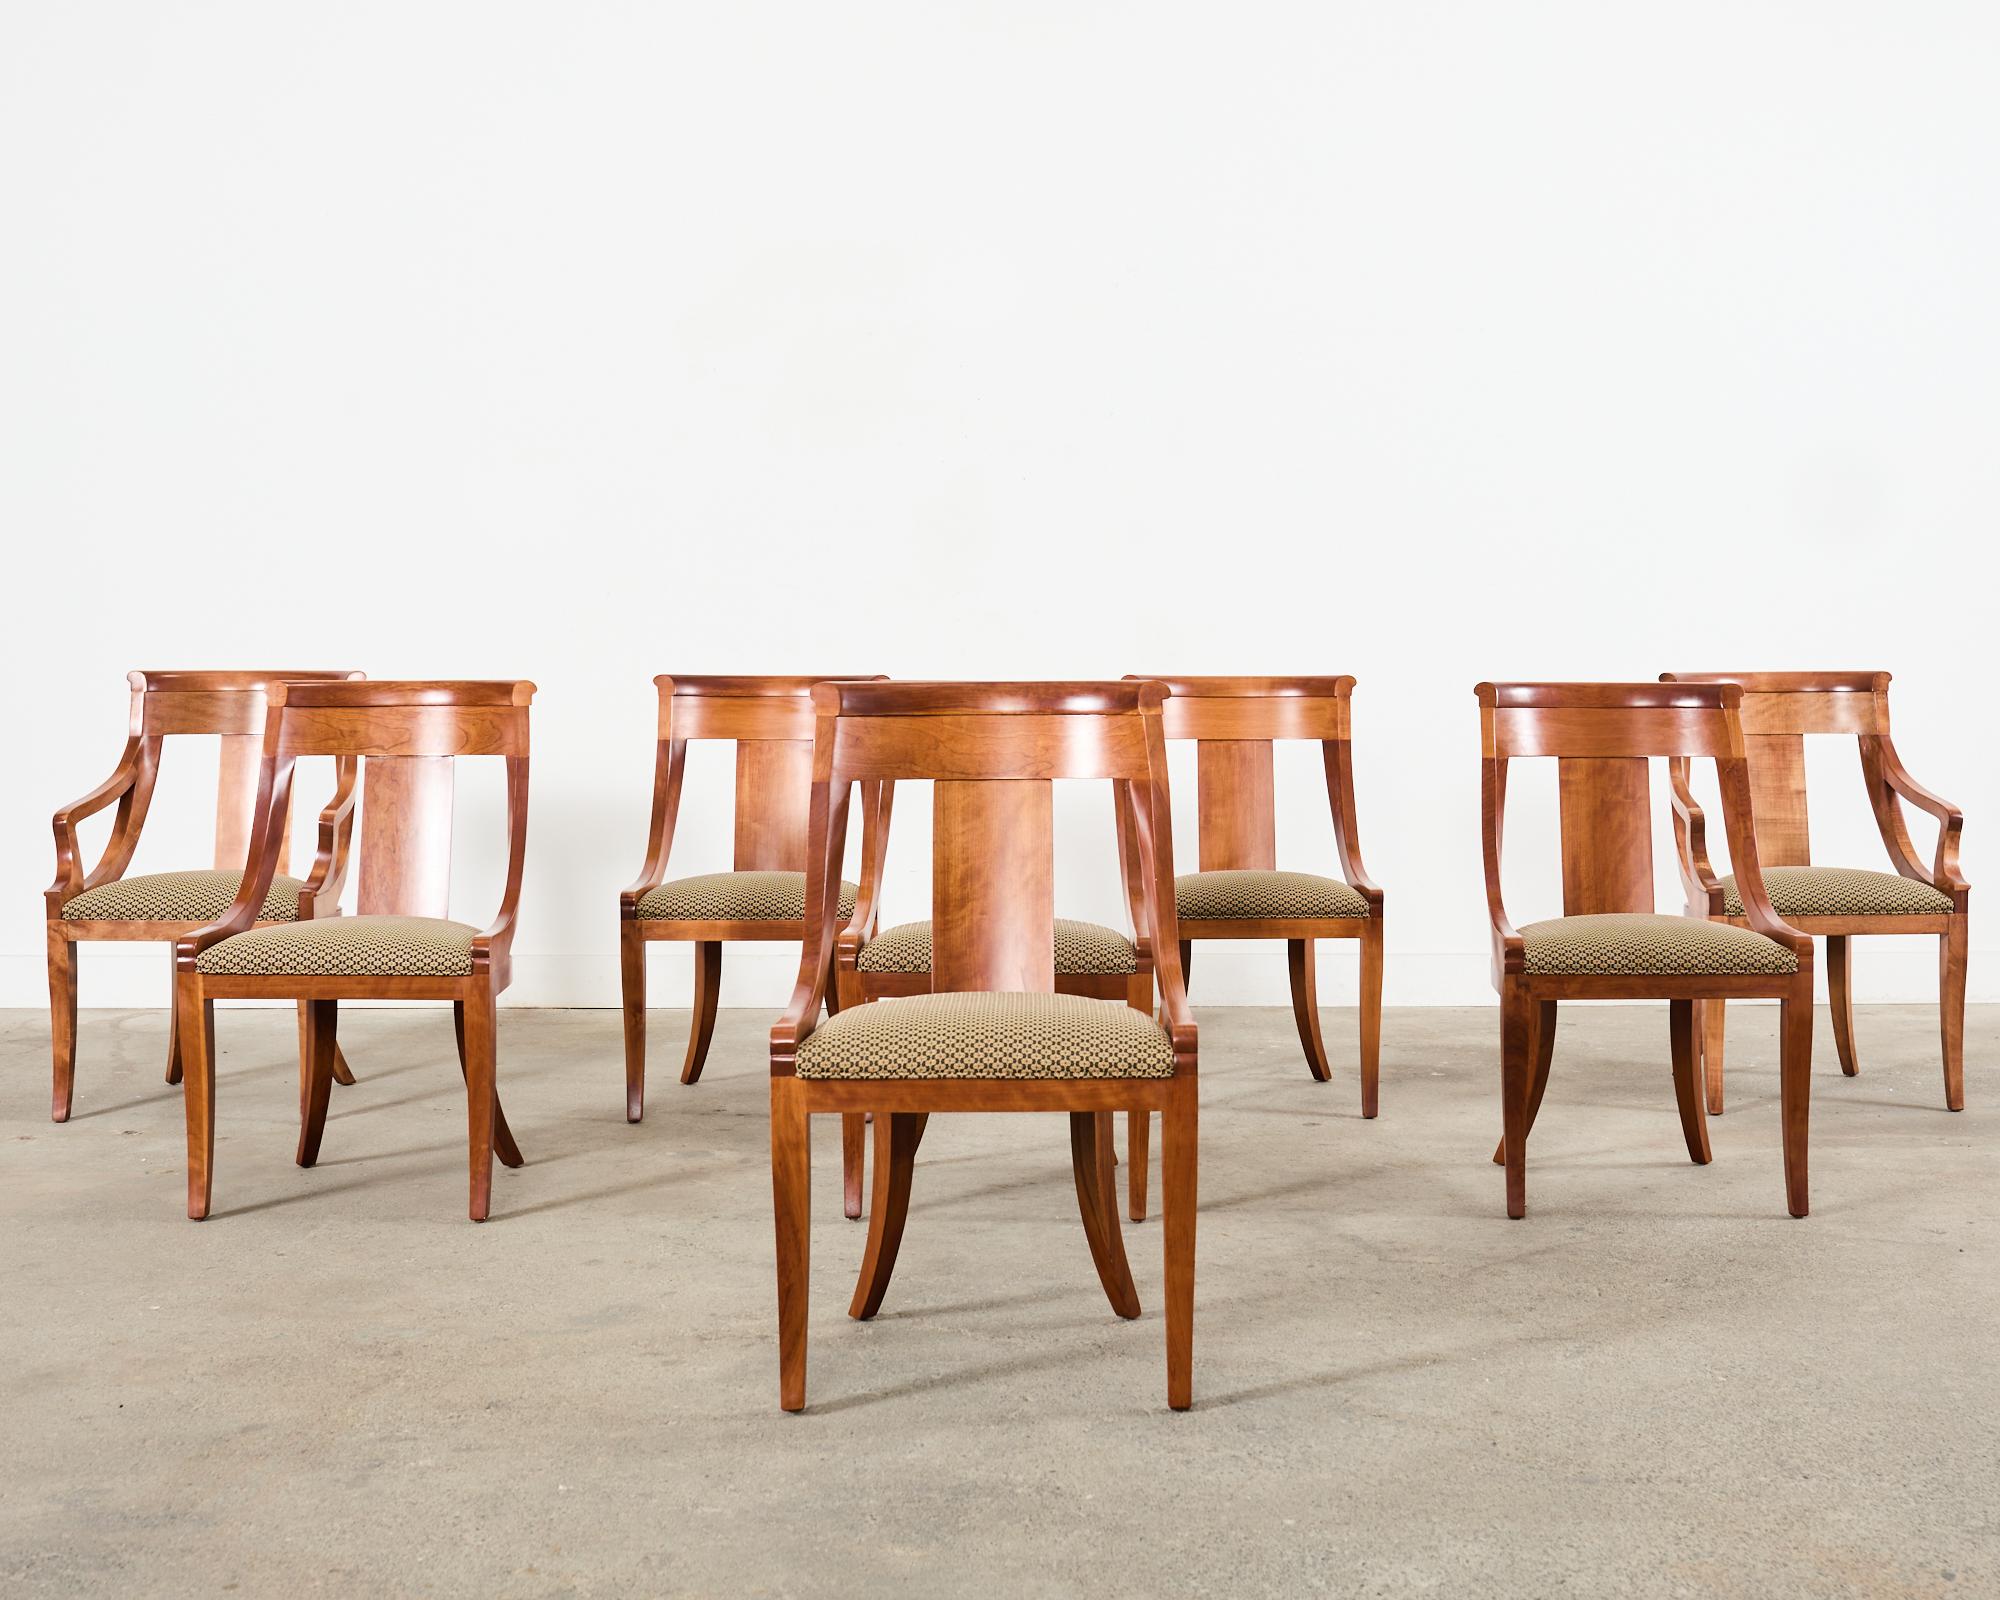 Fabulous set of eight gondola dining chairs by Baker crafted in the empire taste. The frames feature a gracefully curved scoop or spoon back constructed from radiant fruitwood. The set consists of six side chairs and two host armchairs with 23 inch